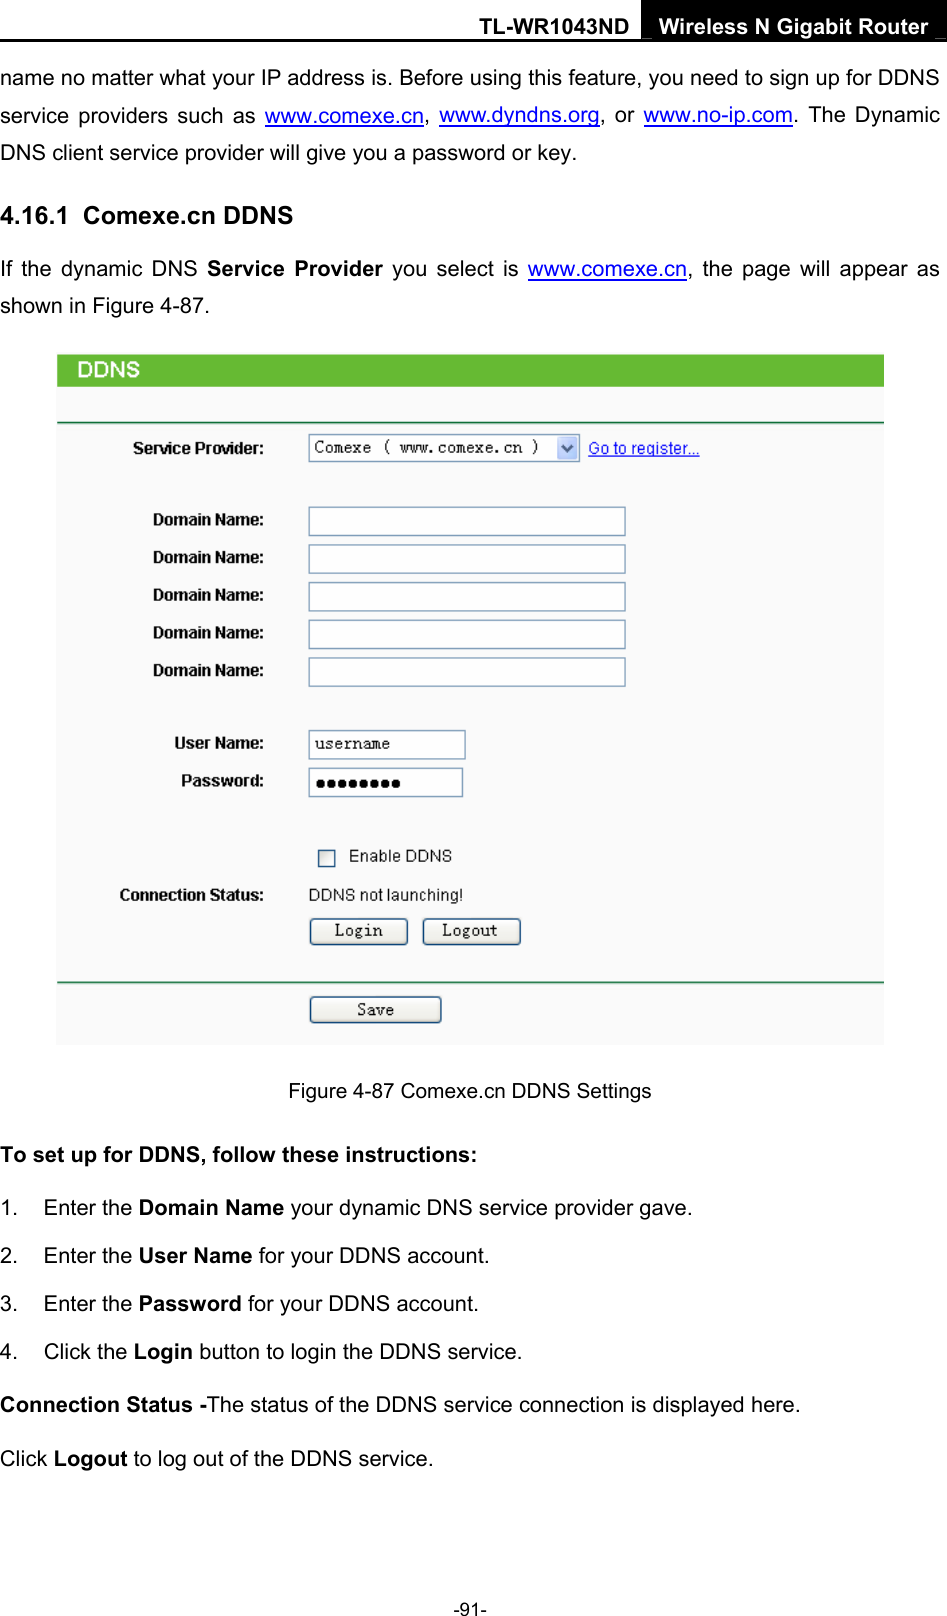 TL-WR1043ND Wireless N Gigabit Router  -91- name no matter what your IP address is. Before using this feature, you need to sign up for DDNS service providers such as www.comexe.cn, www.dyndns.org, or www.no-ip.com. The Dynamic DNS client service provider will give you a password or key. 4.16.1  Comexe.cn DDNS If the dynamic DNS Service Provider you select is www.comexe.cn, the page will appear as shown in Figure 4-87.  Figure 4-87 Comexe.cn DDNS Settings To set up for DDNS, follow these instructions: 1. Enter the Domain Name your dynamic DNS service provider gave.   2. Enter the User Name for your DDNS account.   3. Enter the Password for your DDNS account.   4. Click the Login button to login the DDNS service.   Connection Status -The status of the DDNS service connection is displayed here. Click Logout to log out of the DDNS service.   